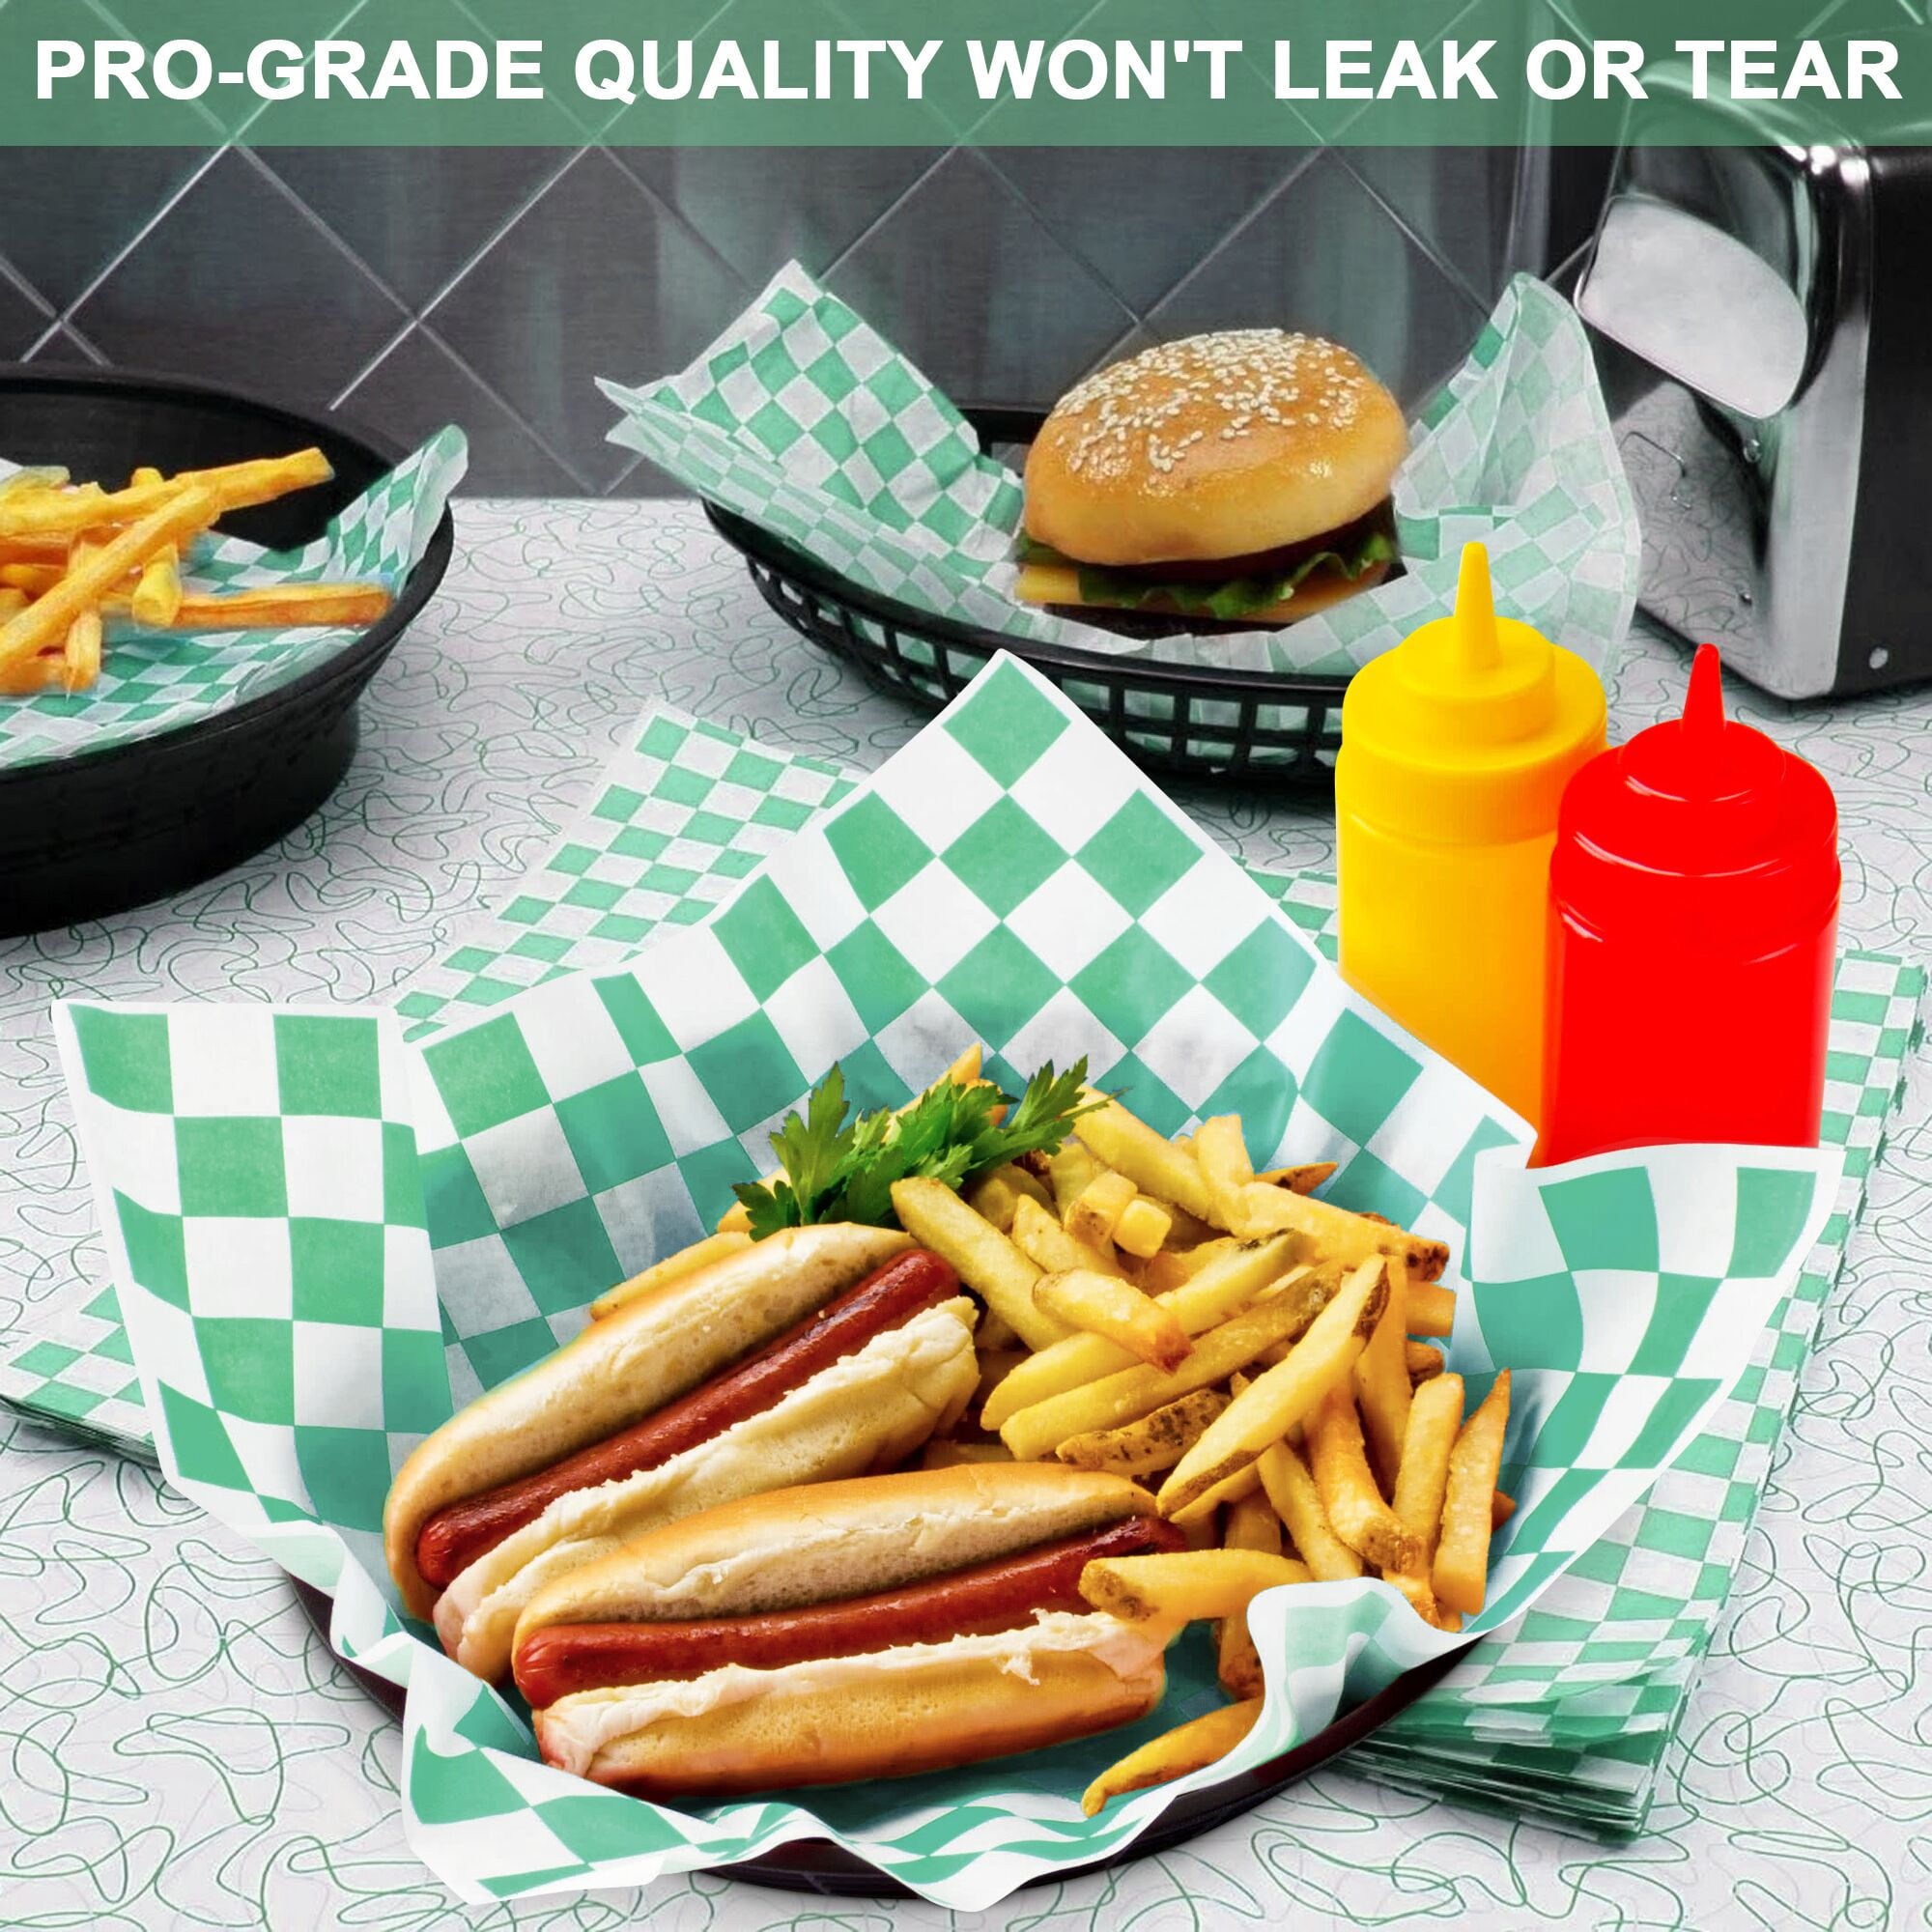 [5000 Sheets] 12x12 Inch Deli Paper Sheets Sandwich Wrap - Green and White  Checkered Food Basket Liners, Grease Resistant Wrapper for Barbecue  Restaurants, Picnics, Parties, Kids Meal, Outdoor Fair 